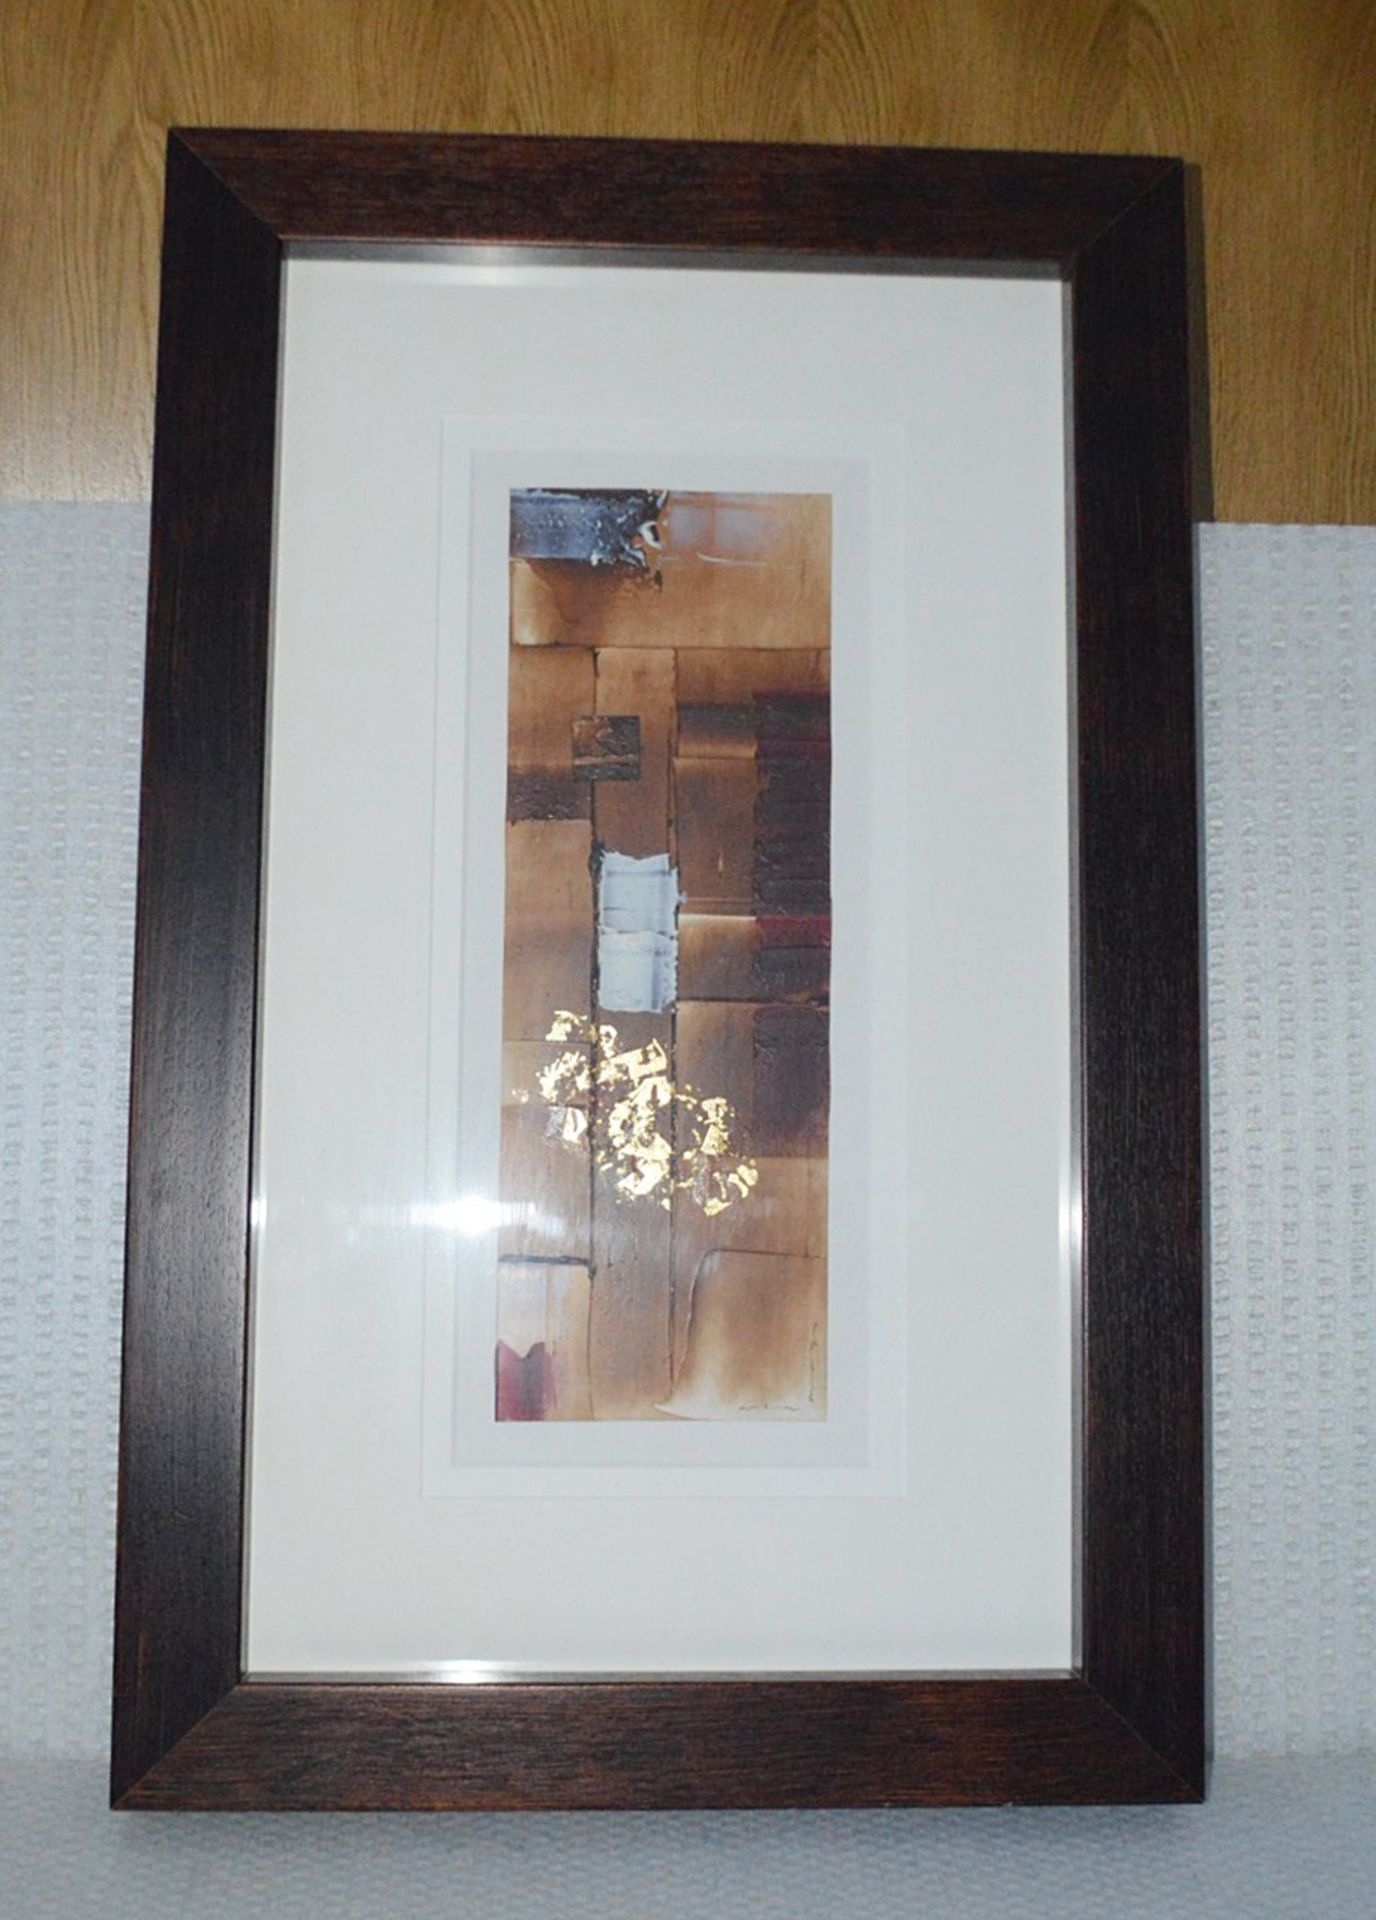 1 x Framed Original Mixed Media Oblong-Shaped Artwork By Orla May In Brown & Gold - Image 4 of 6